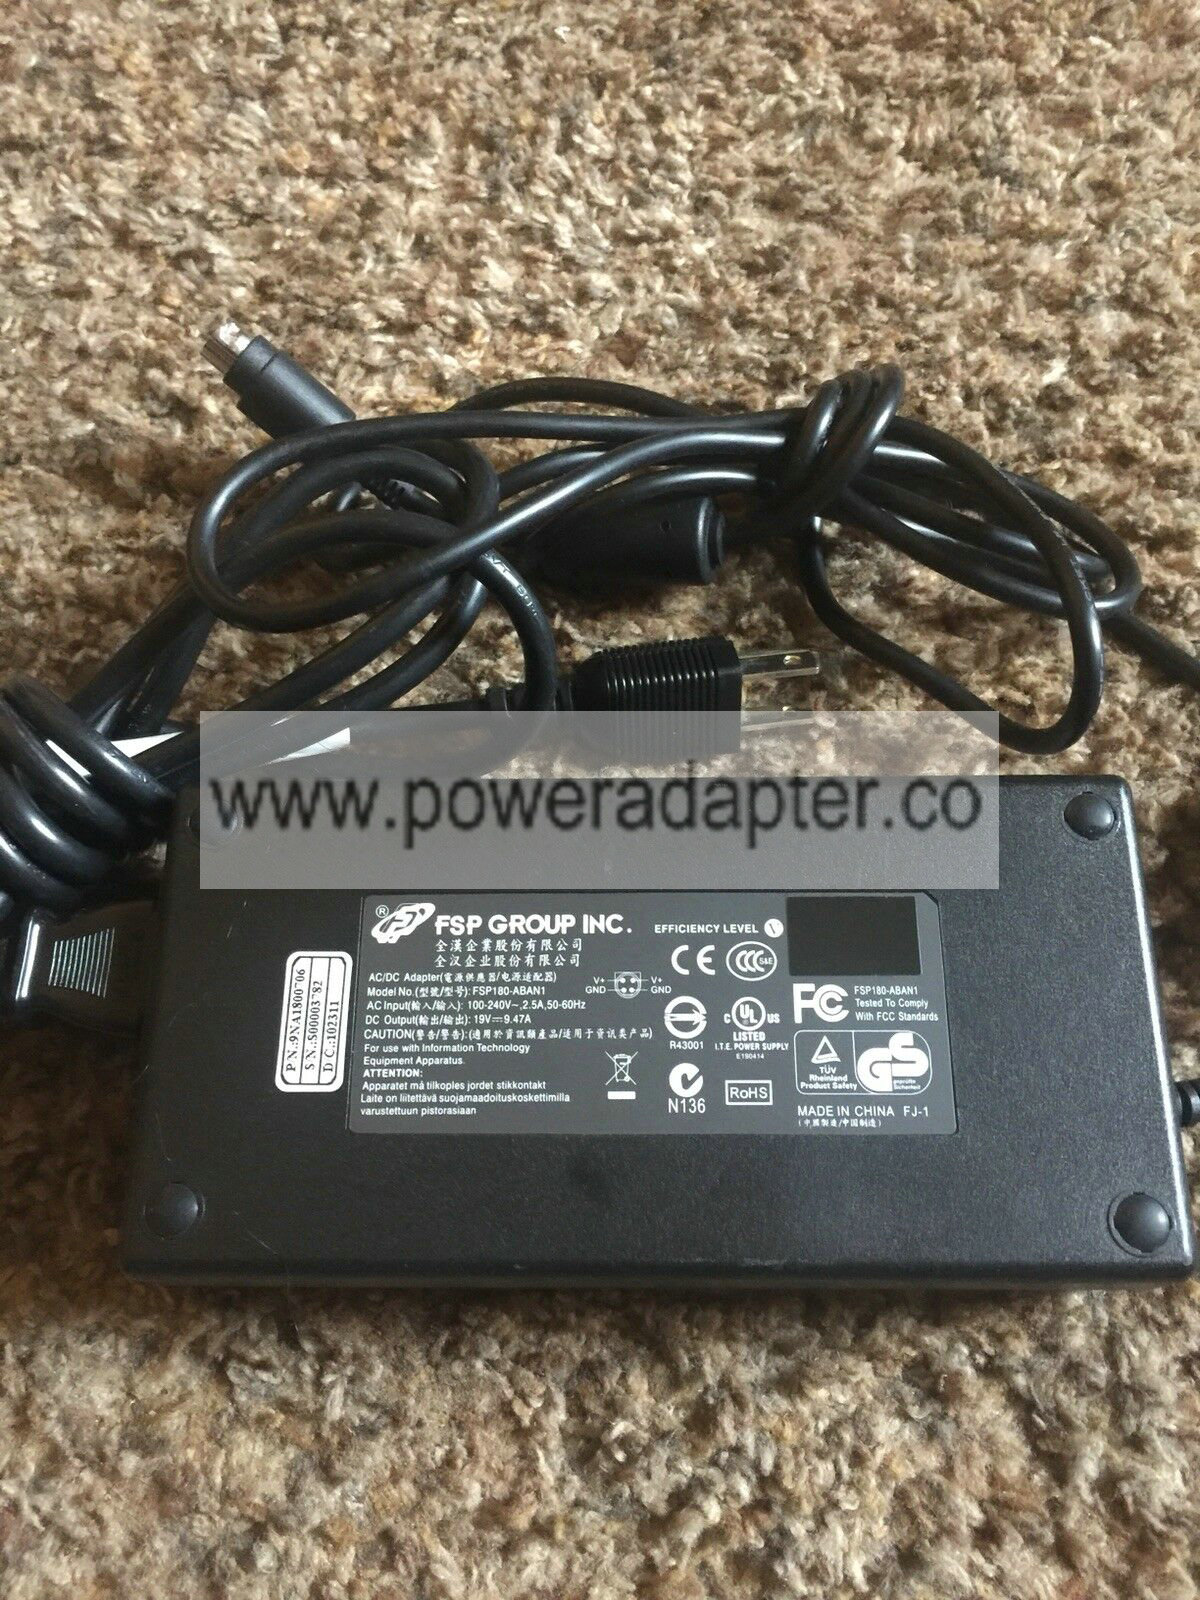 AC/DC Adapter For FSP GROUP INC. FSP180-ABAN1 19v 9.47A 4pin Brand: FPS GROUP INC. Type: AC & DC 19v 9.47A 4pin